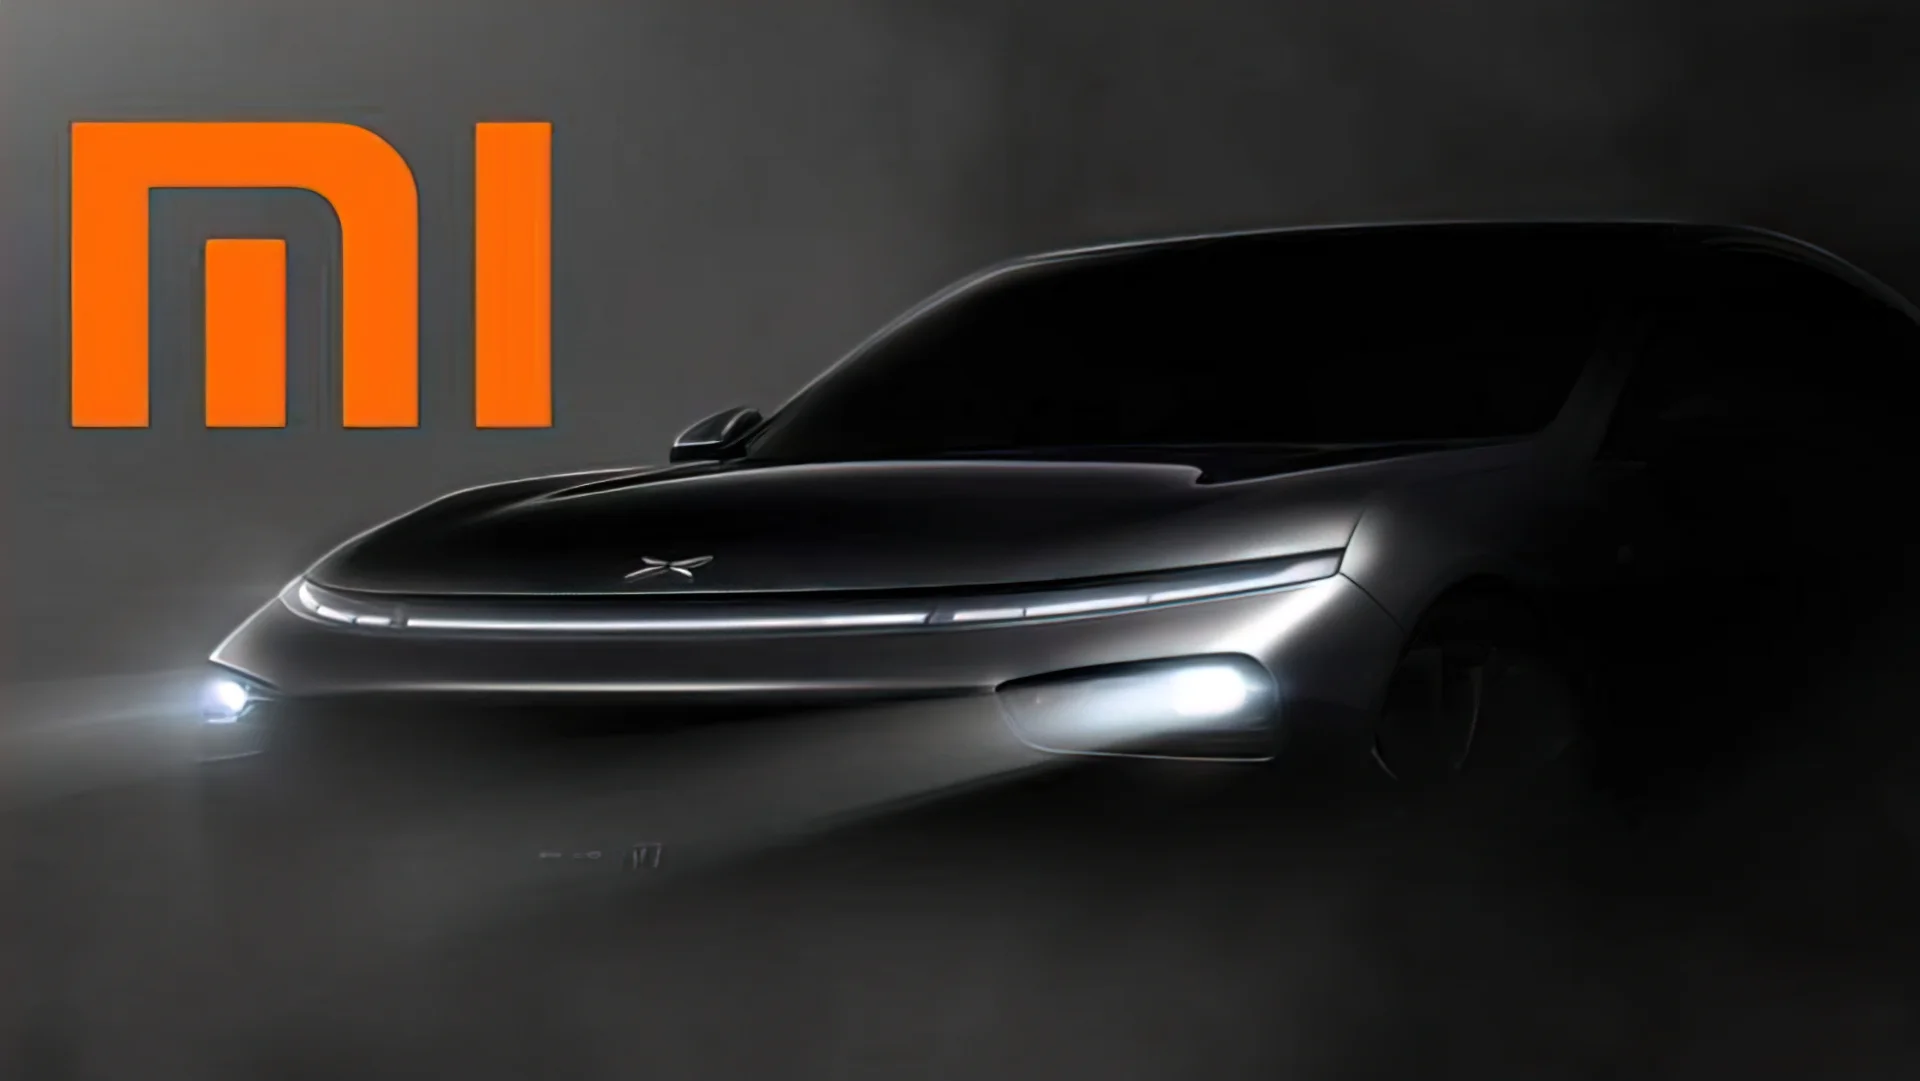 New images of Xiaomi's electric car have become available